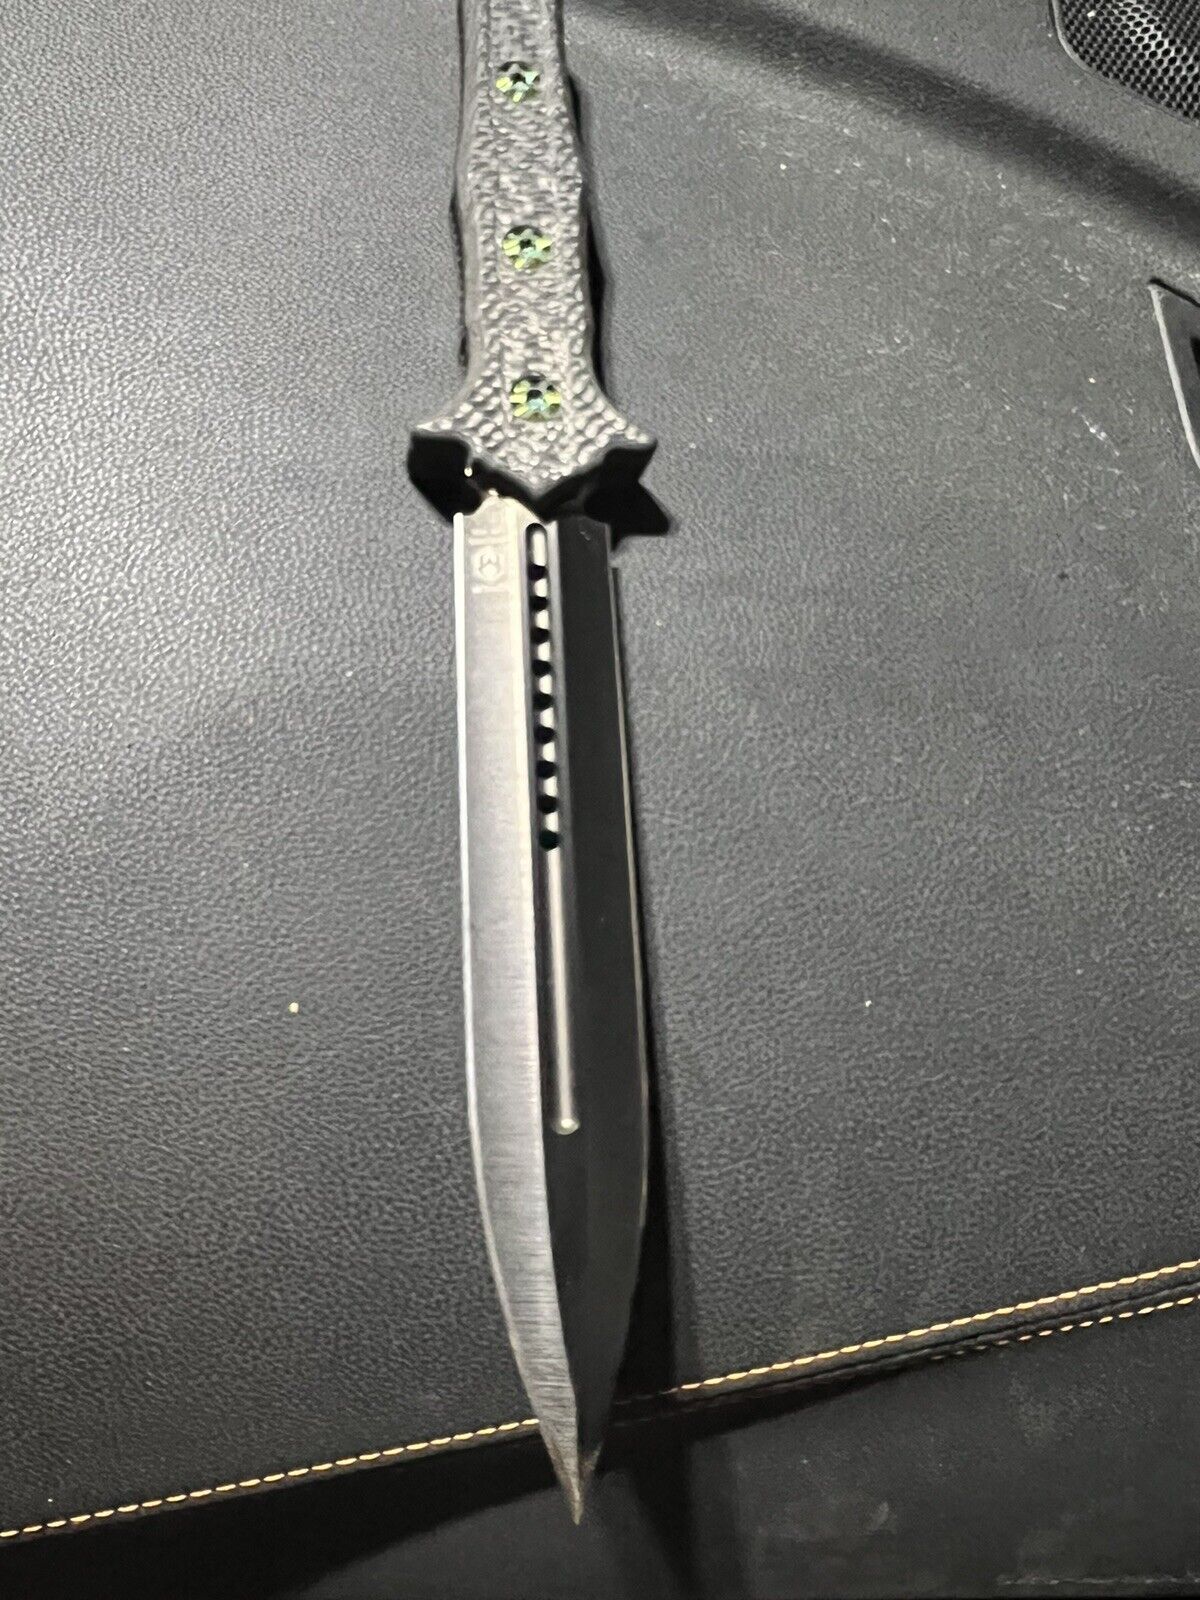 HERETIC NEPHILIM DOUBLE EDGE FIXED BLADE - BATTLEWORN WITH CARBON FIBER SCALES